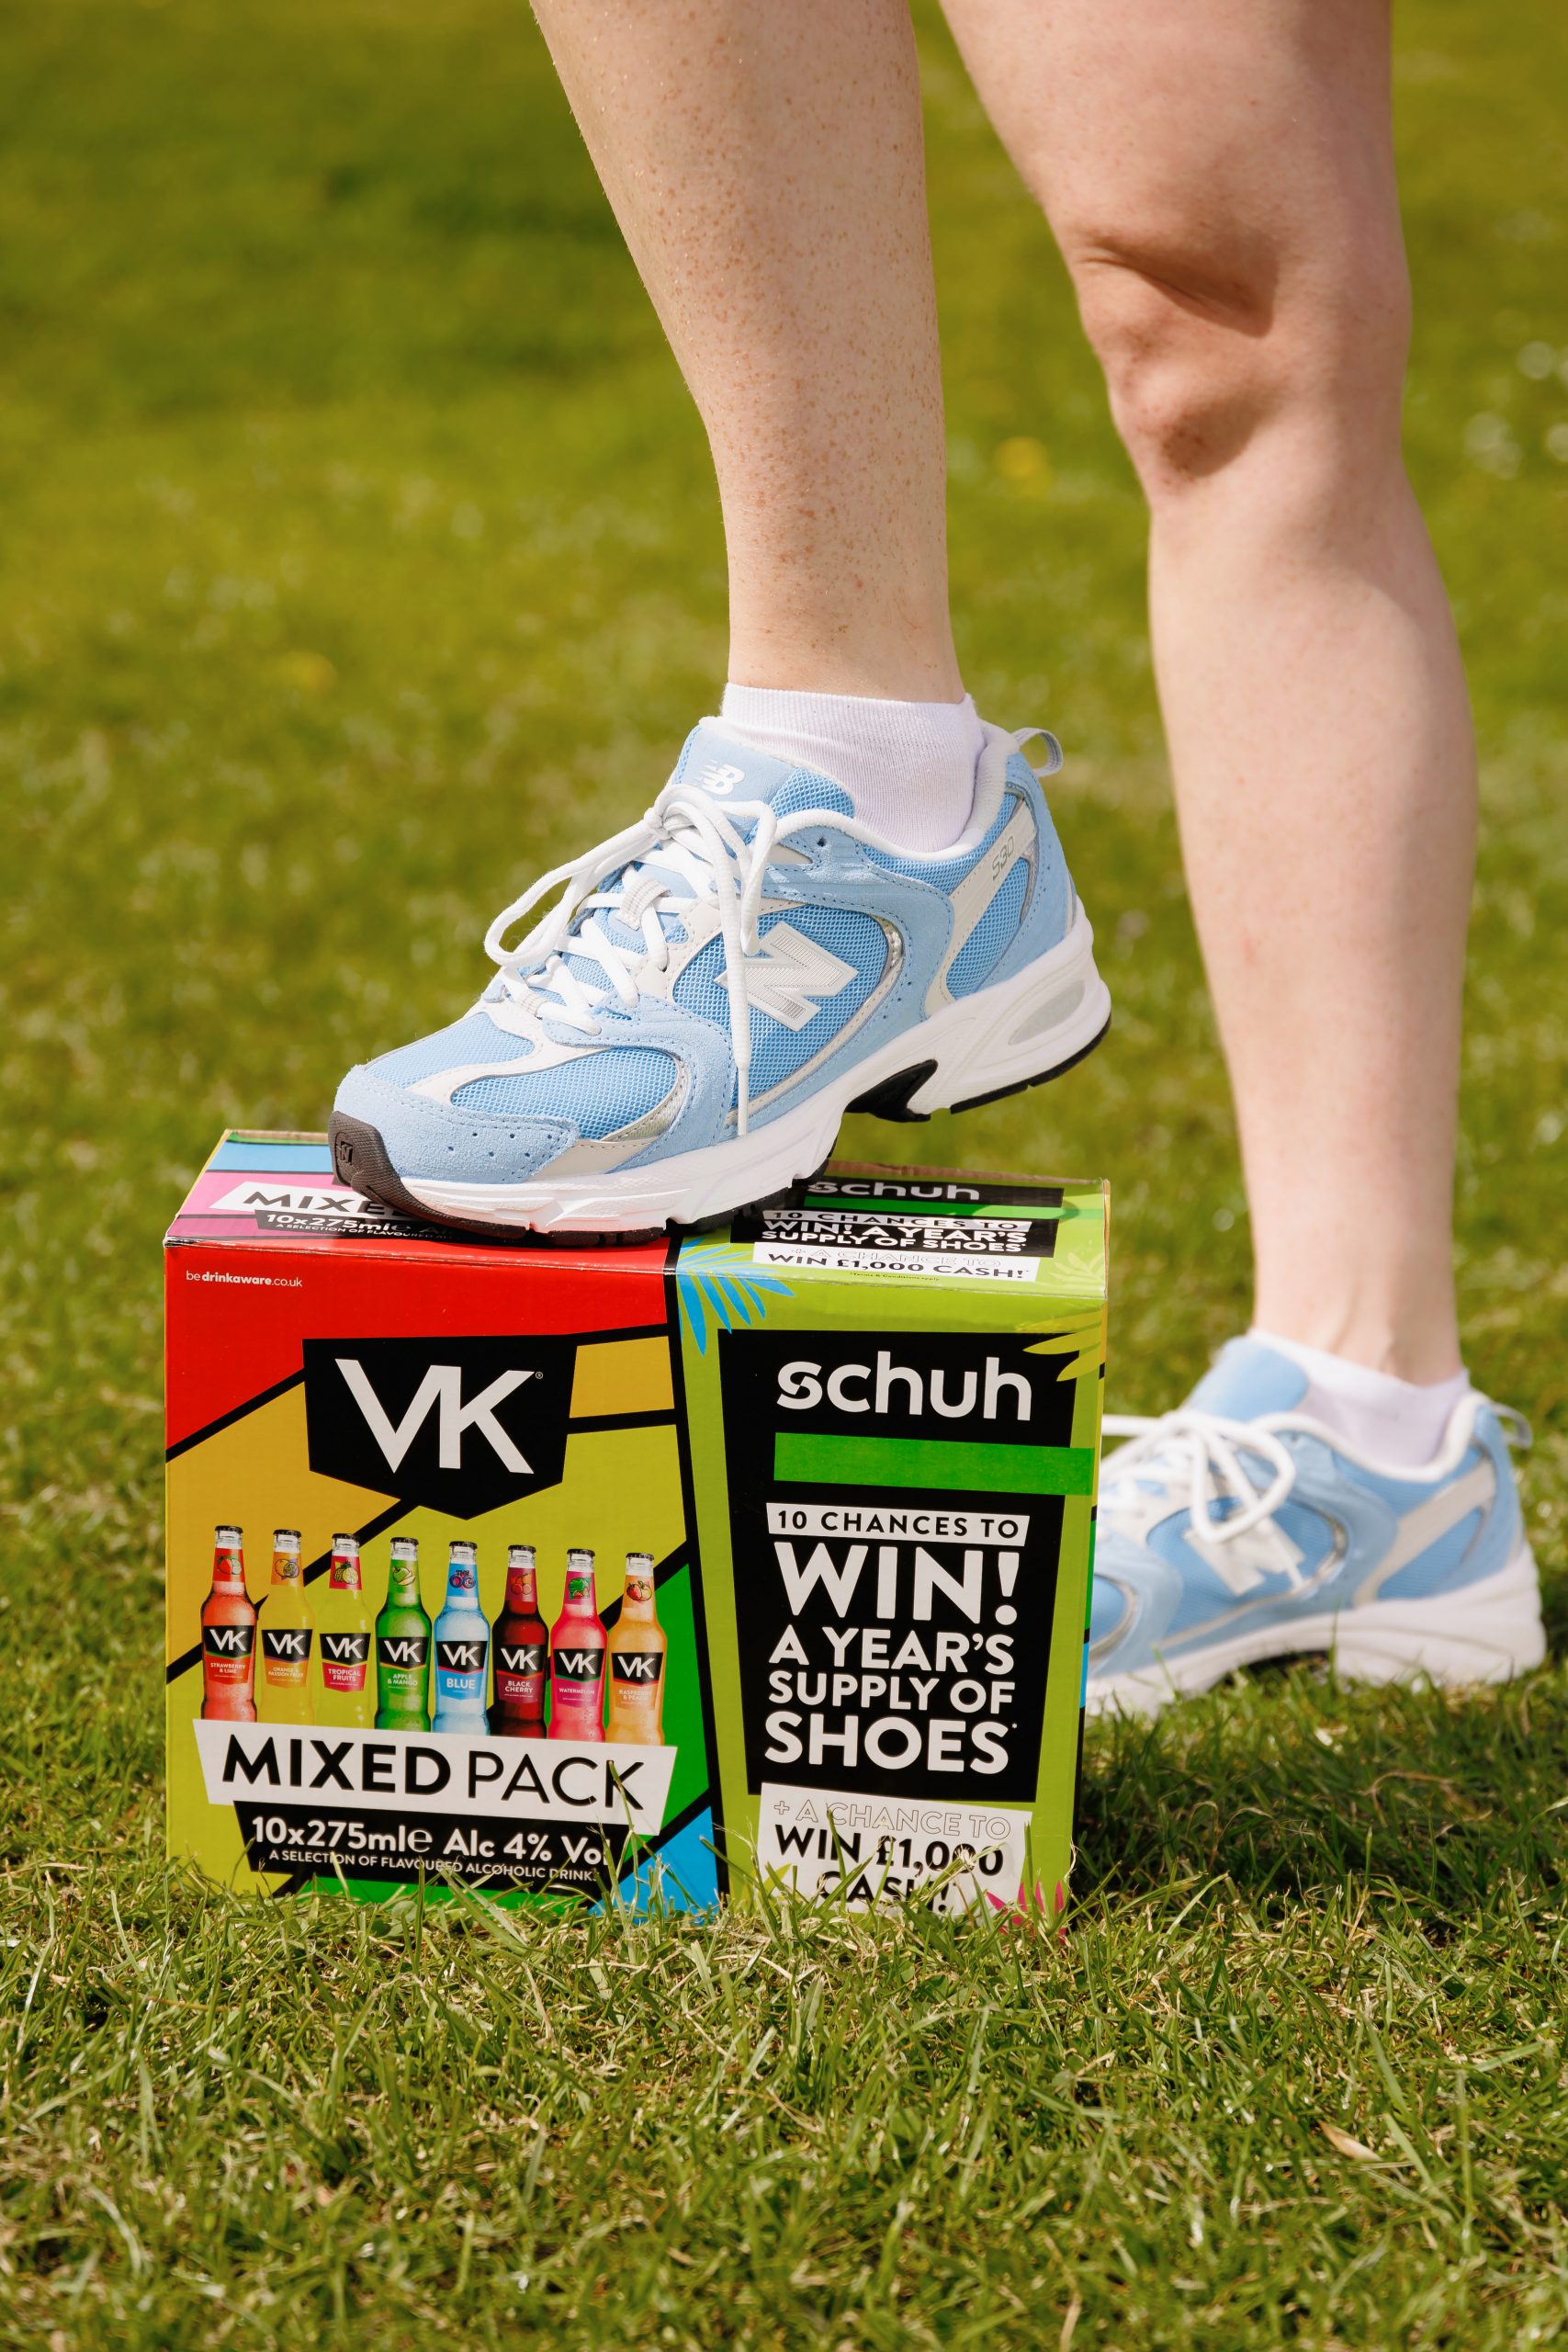 VK summer campaign with schuh means £10,000 worth of prizes